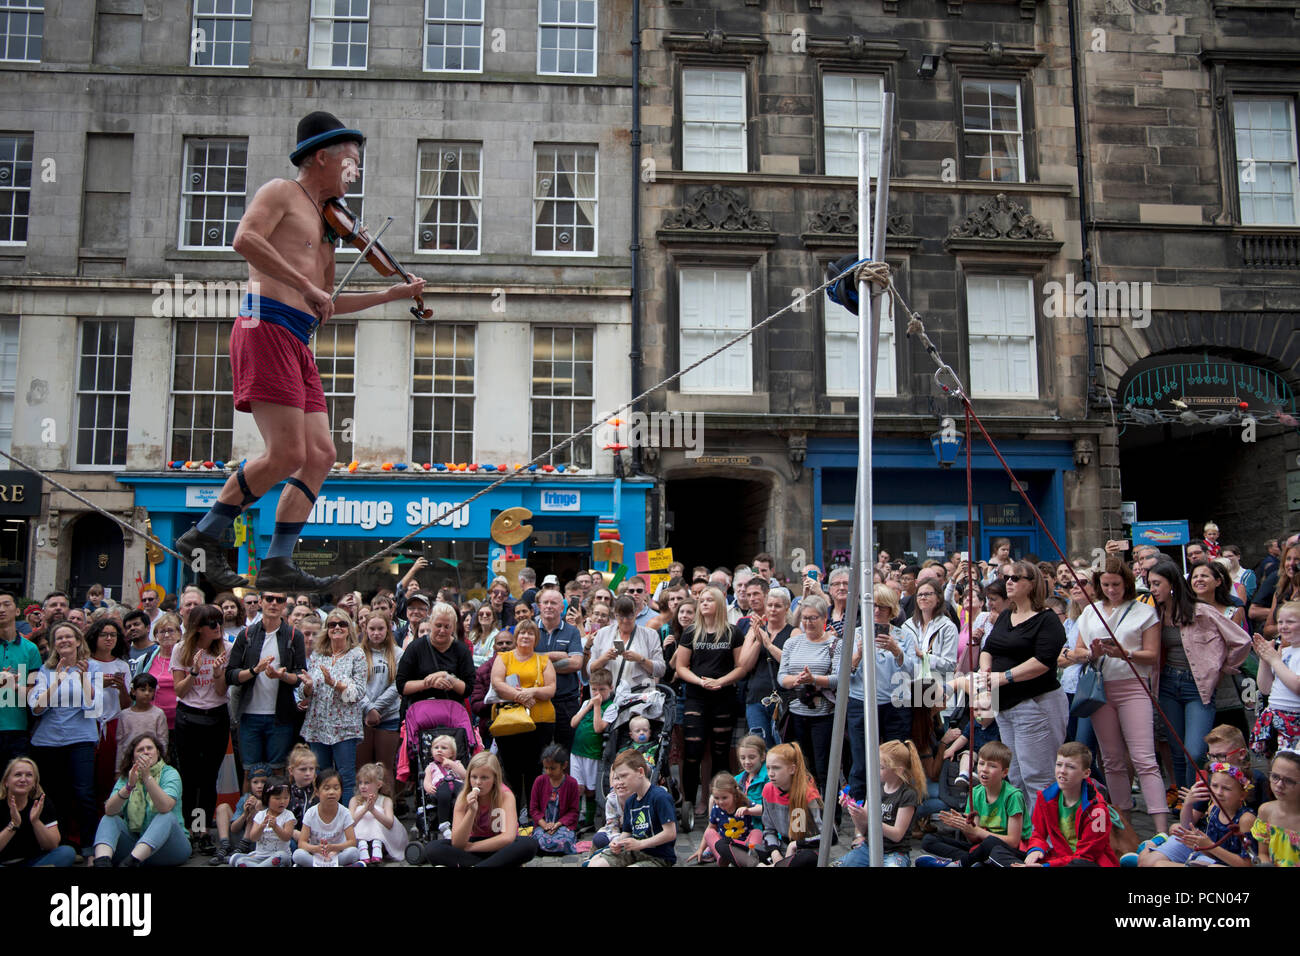 Opening day of 2018 Edinburgh Fringe Festival, Scotland UK, 3 Aug.2018. Big audiences for the street performers on the city's Royal Mile  for the first day of the 2018 Edinburgh Fringe Festival. Stock Photo